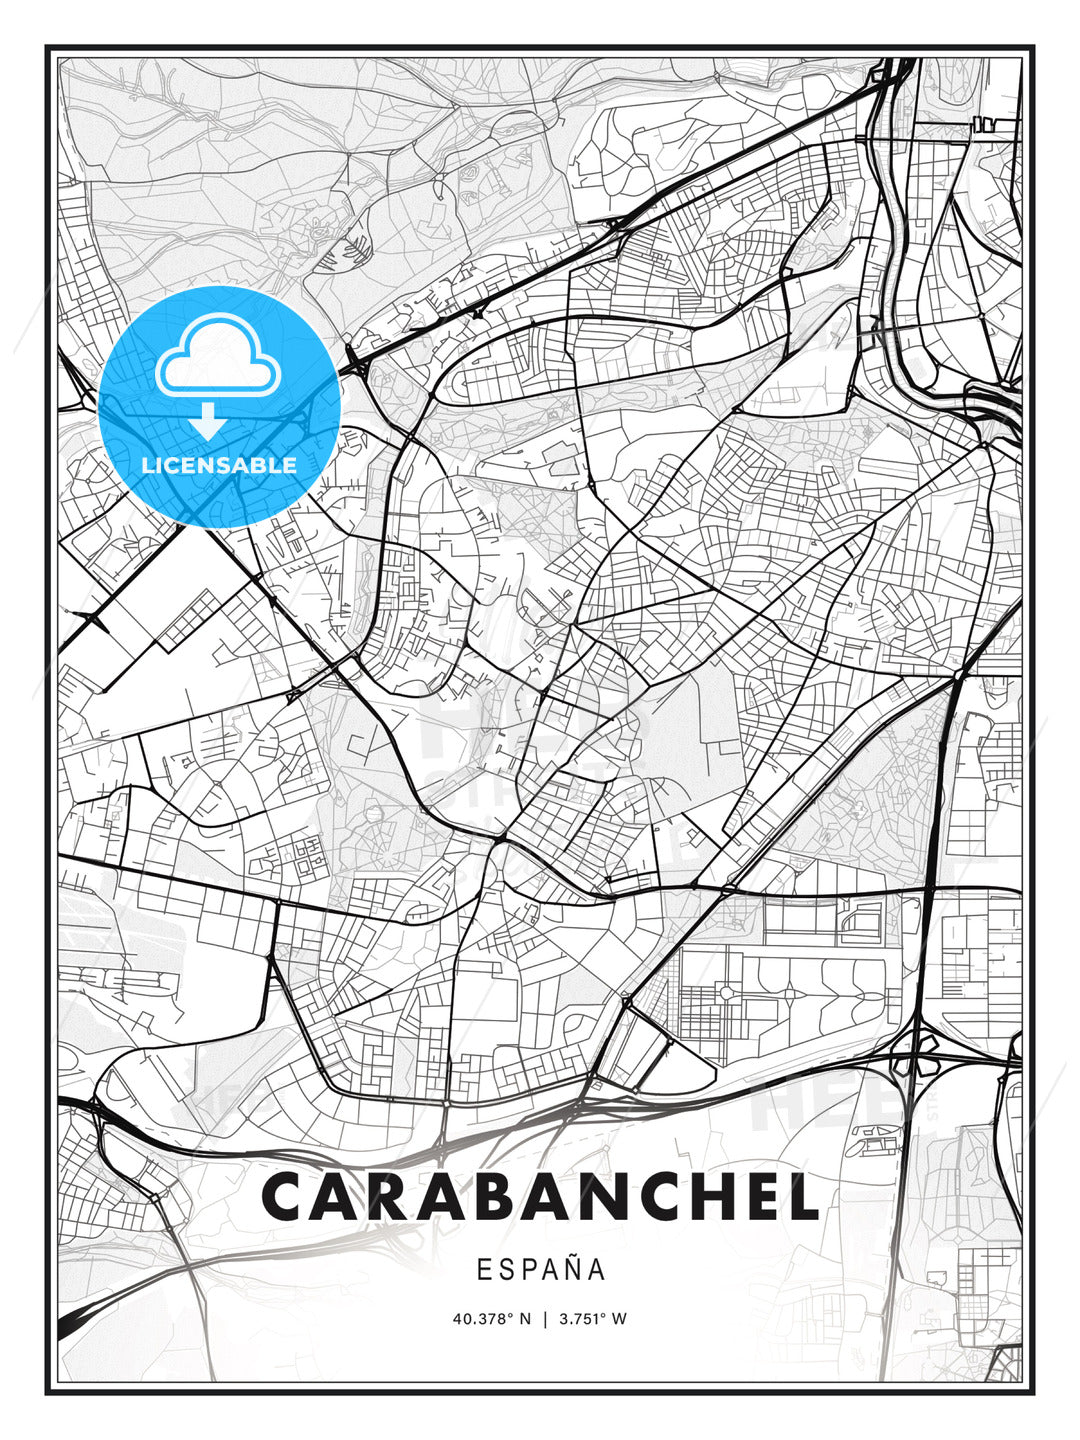 Carabanchel, Spain, Modern Print Template in Various Formats - HEBSTREITS Sketches